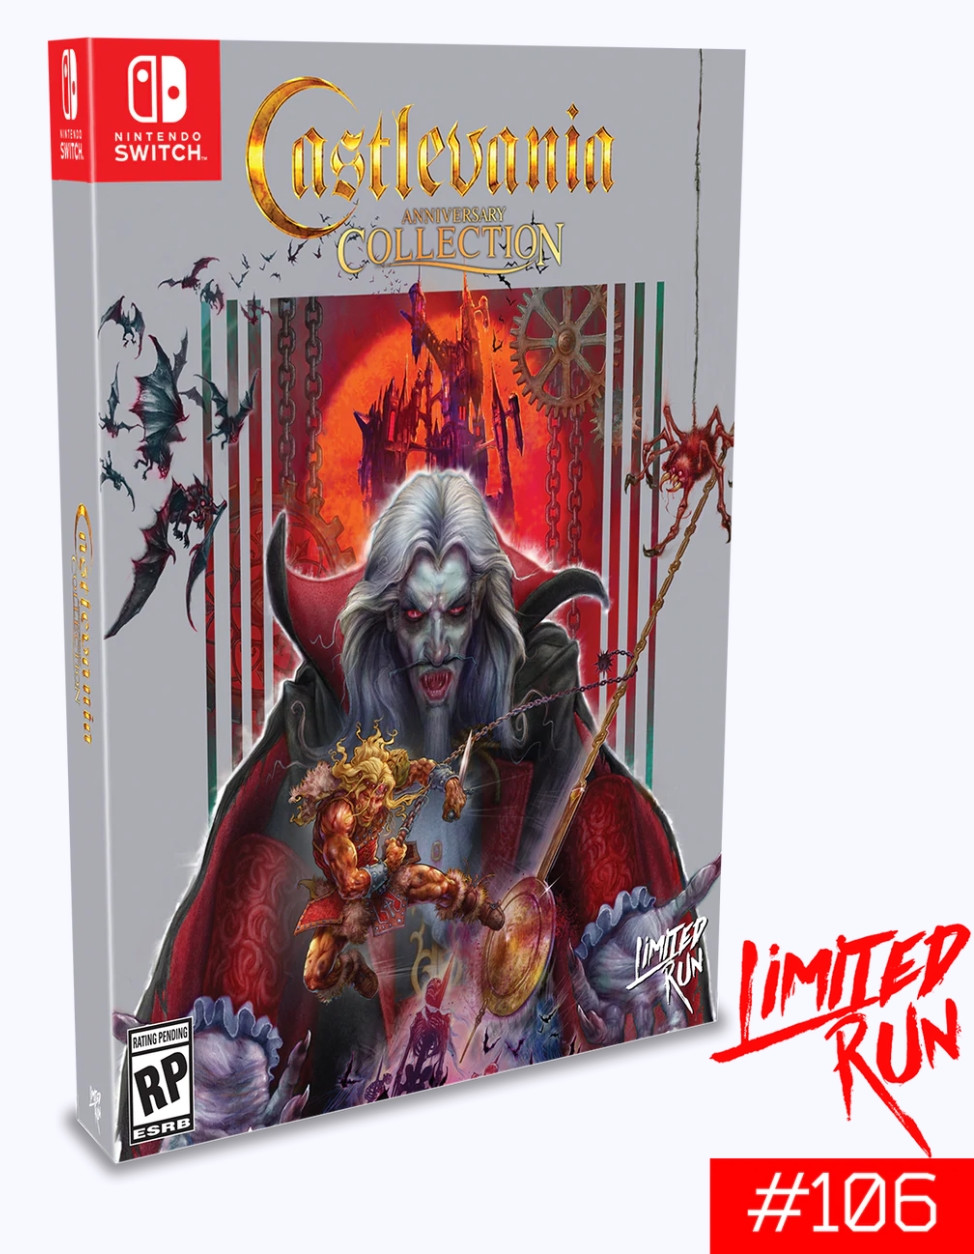 Castlevania - Anniversary Collection Classic Edition (Limited Run Games)